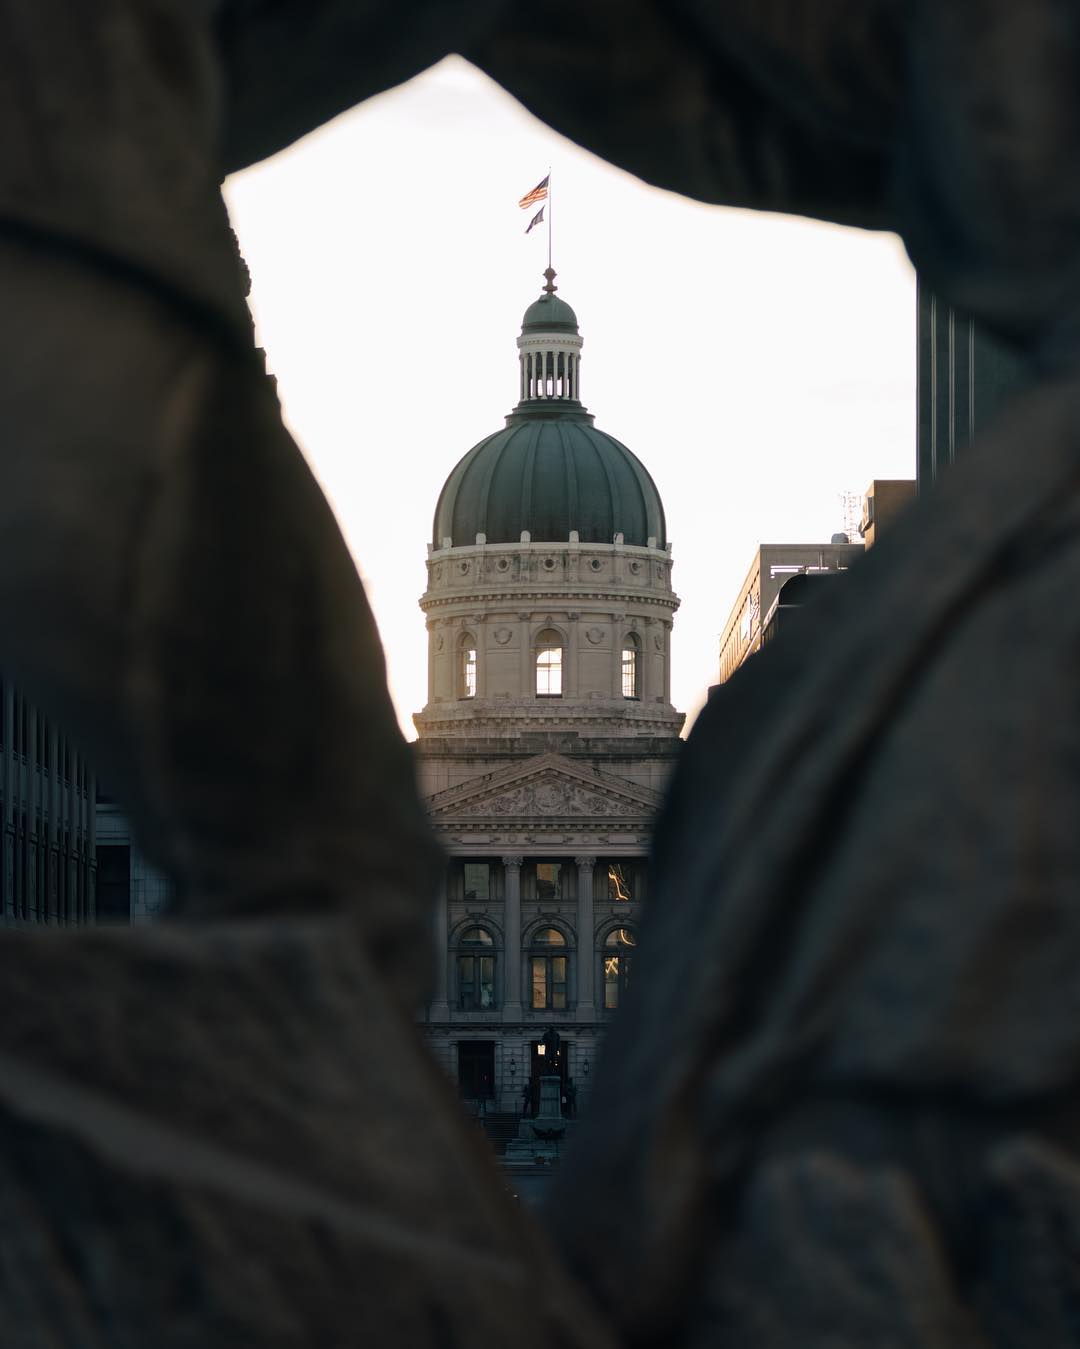 The Indiana Statehouse pays homage to the Parthenon. While Indiana limestone can be found throughout the structure, the doors are made up of Indiana Oak. Took the state four times to get it situated so better late than never, right? 